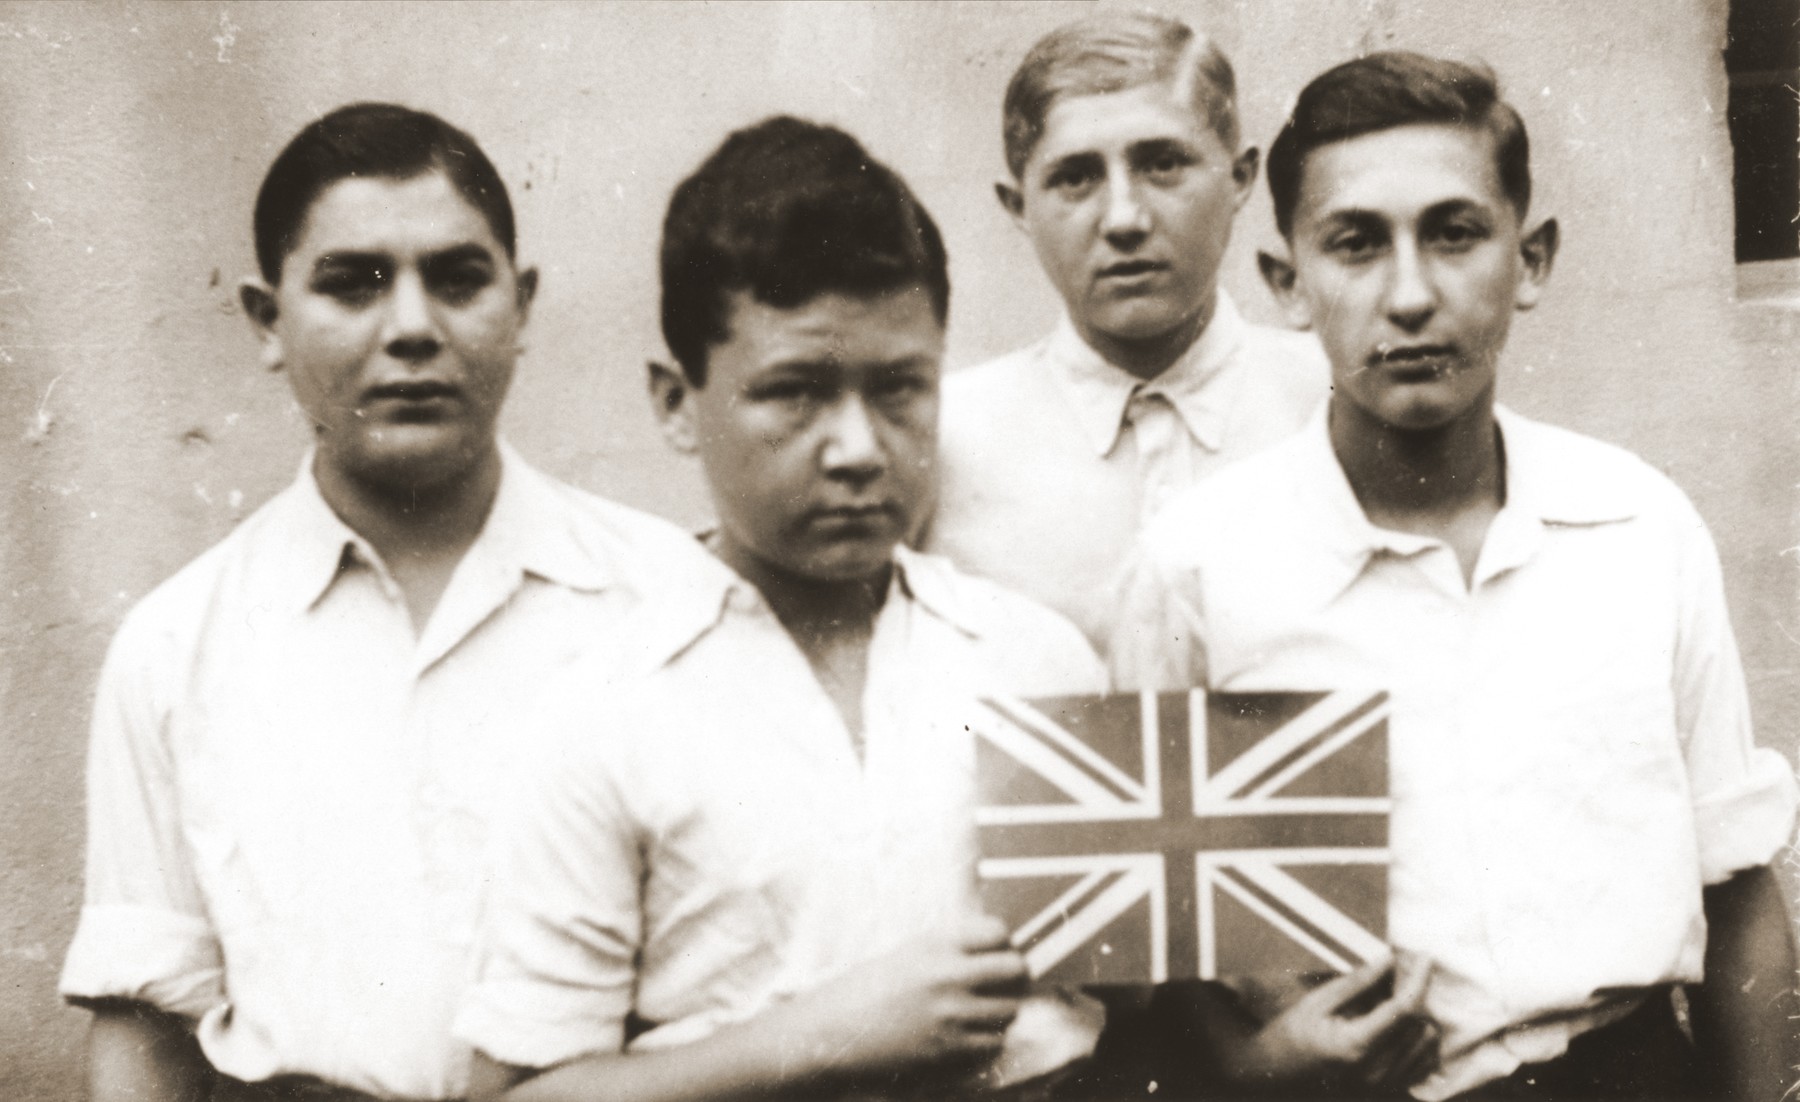 Four members of the orphans transport pose with a Union Jack soon after their arrival in England.

Among those pictured are Polek Gastfreund (right); Jerry Herszberg (second from the left); and Felix Berger (left).